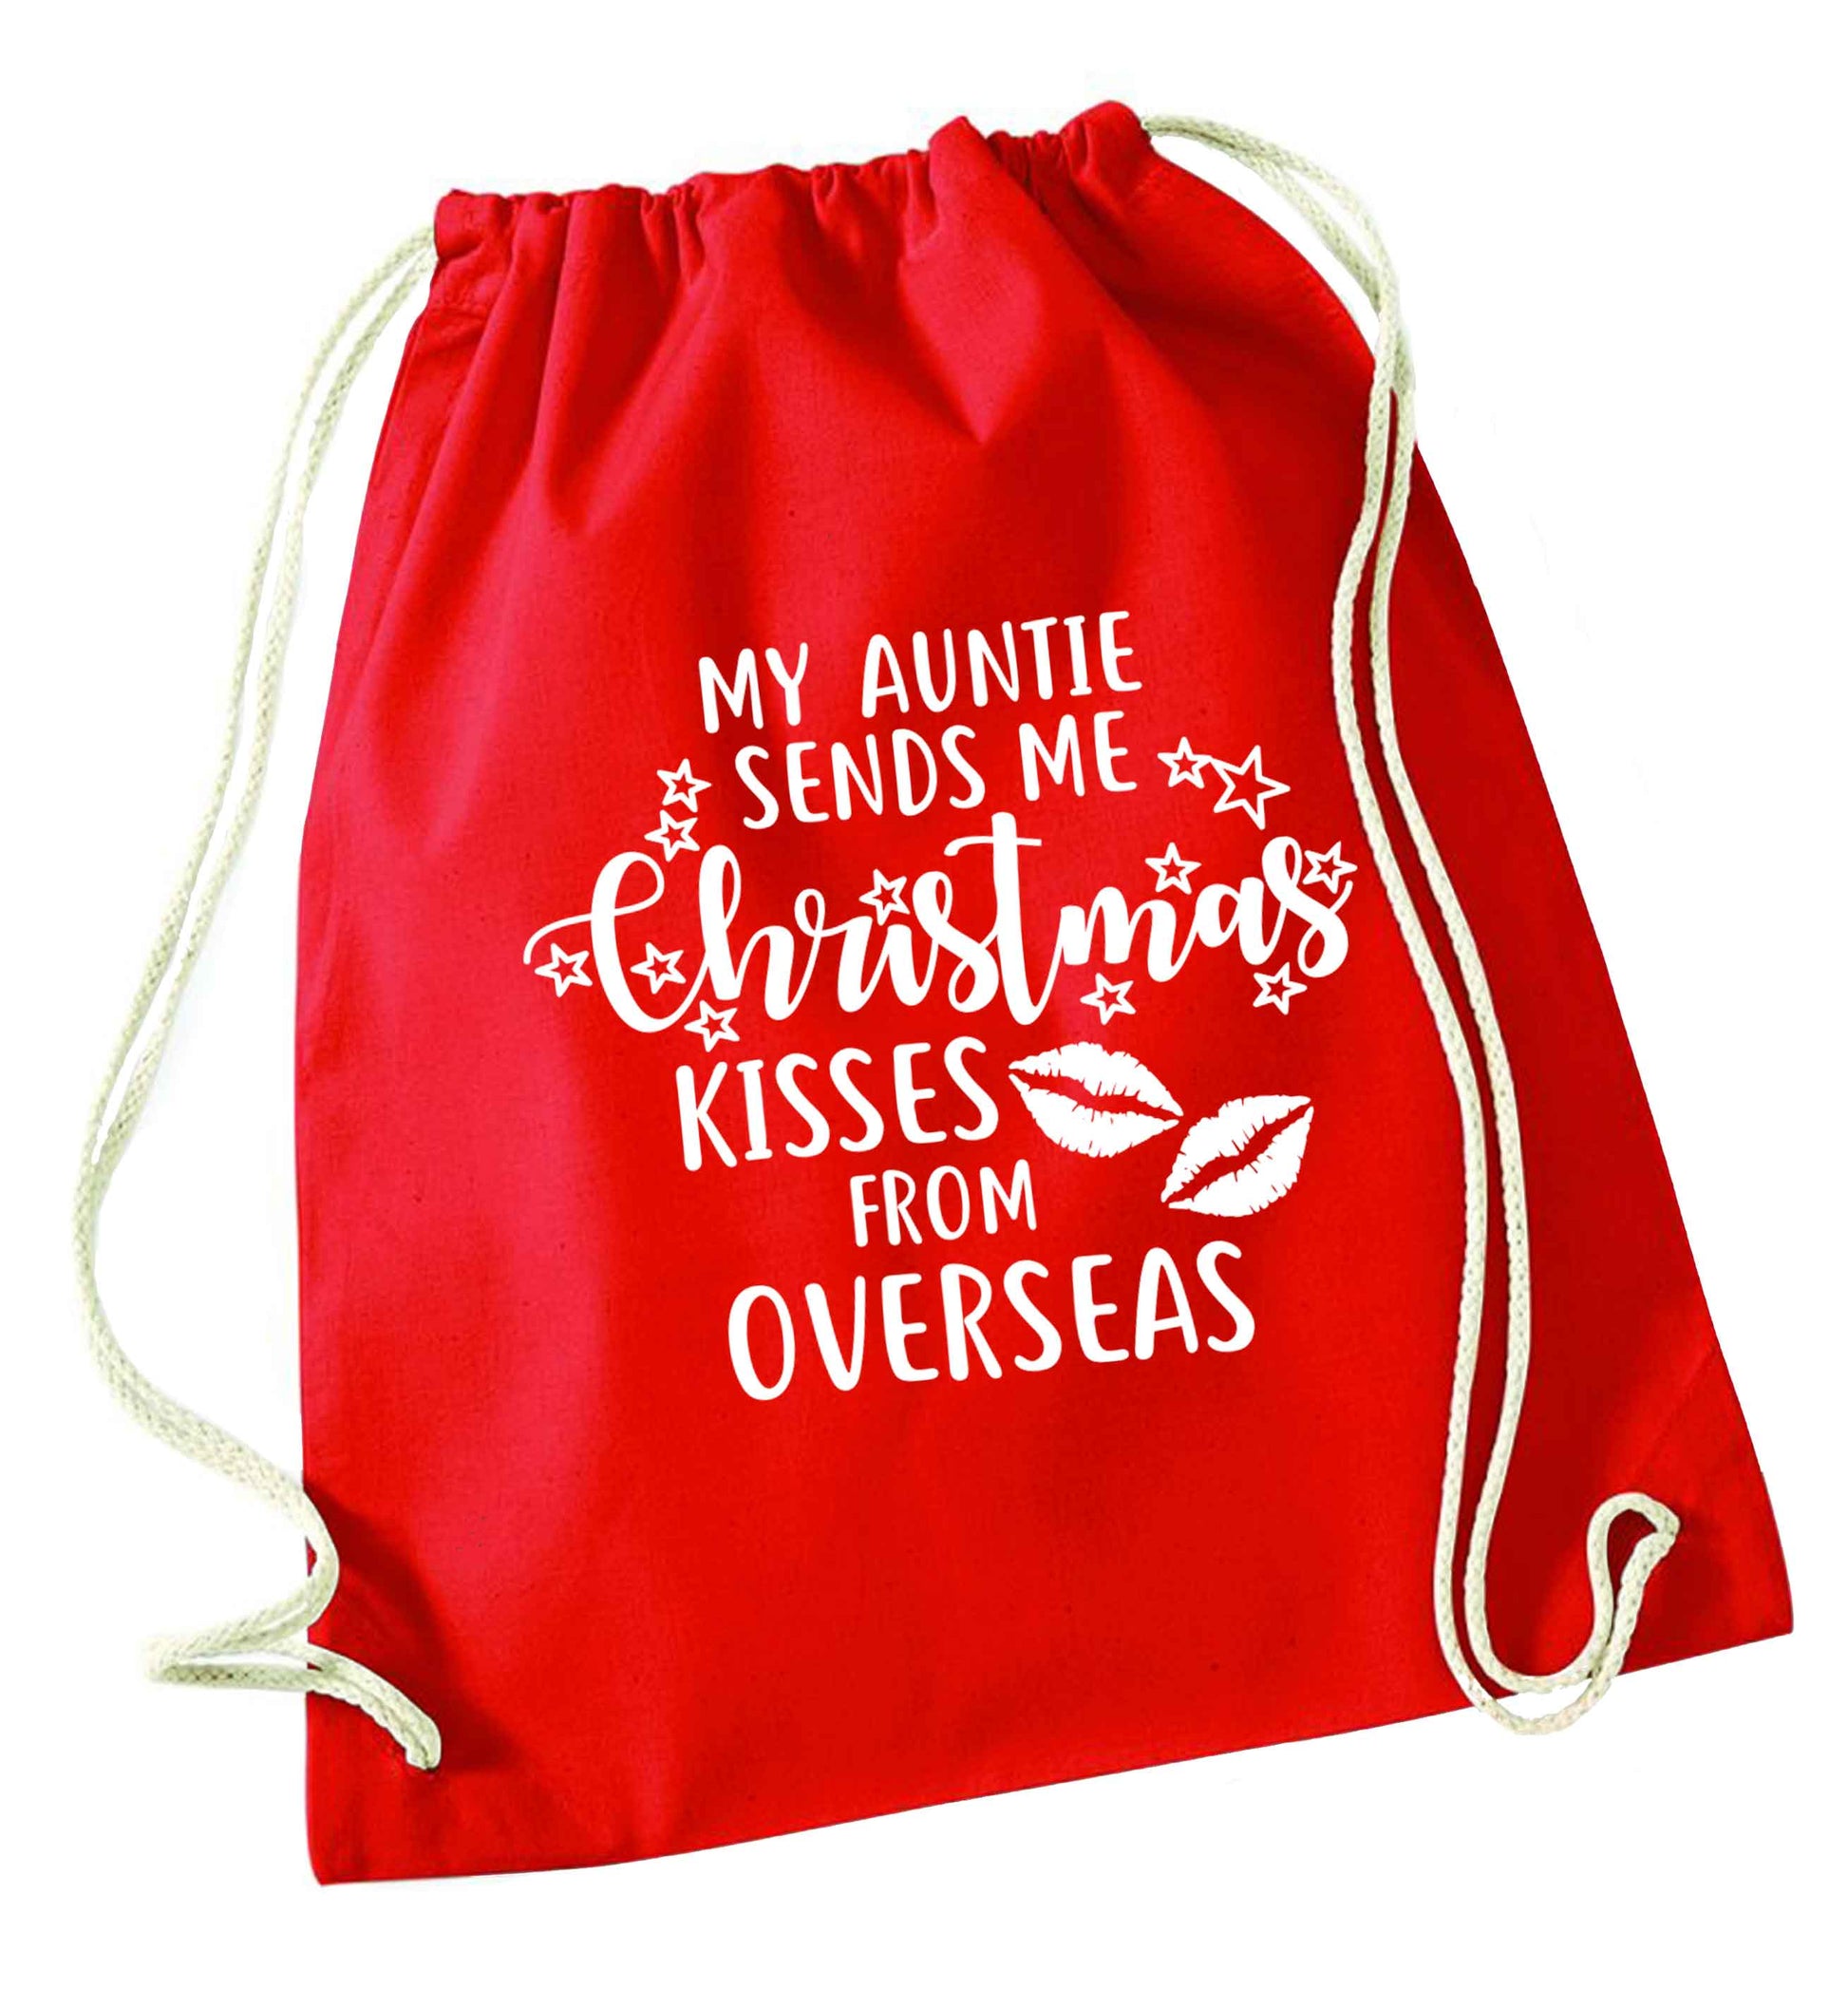 Auntie Christmas Kisses Overseas red drawstring bag 